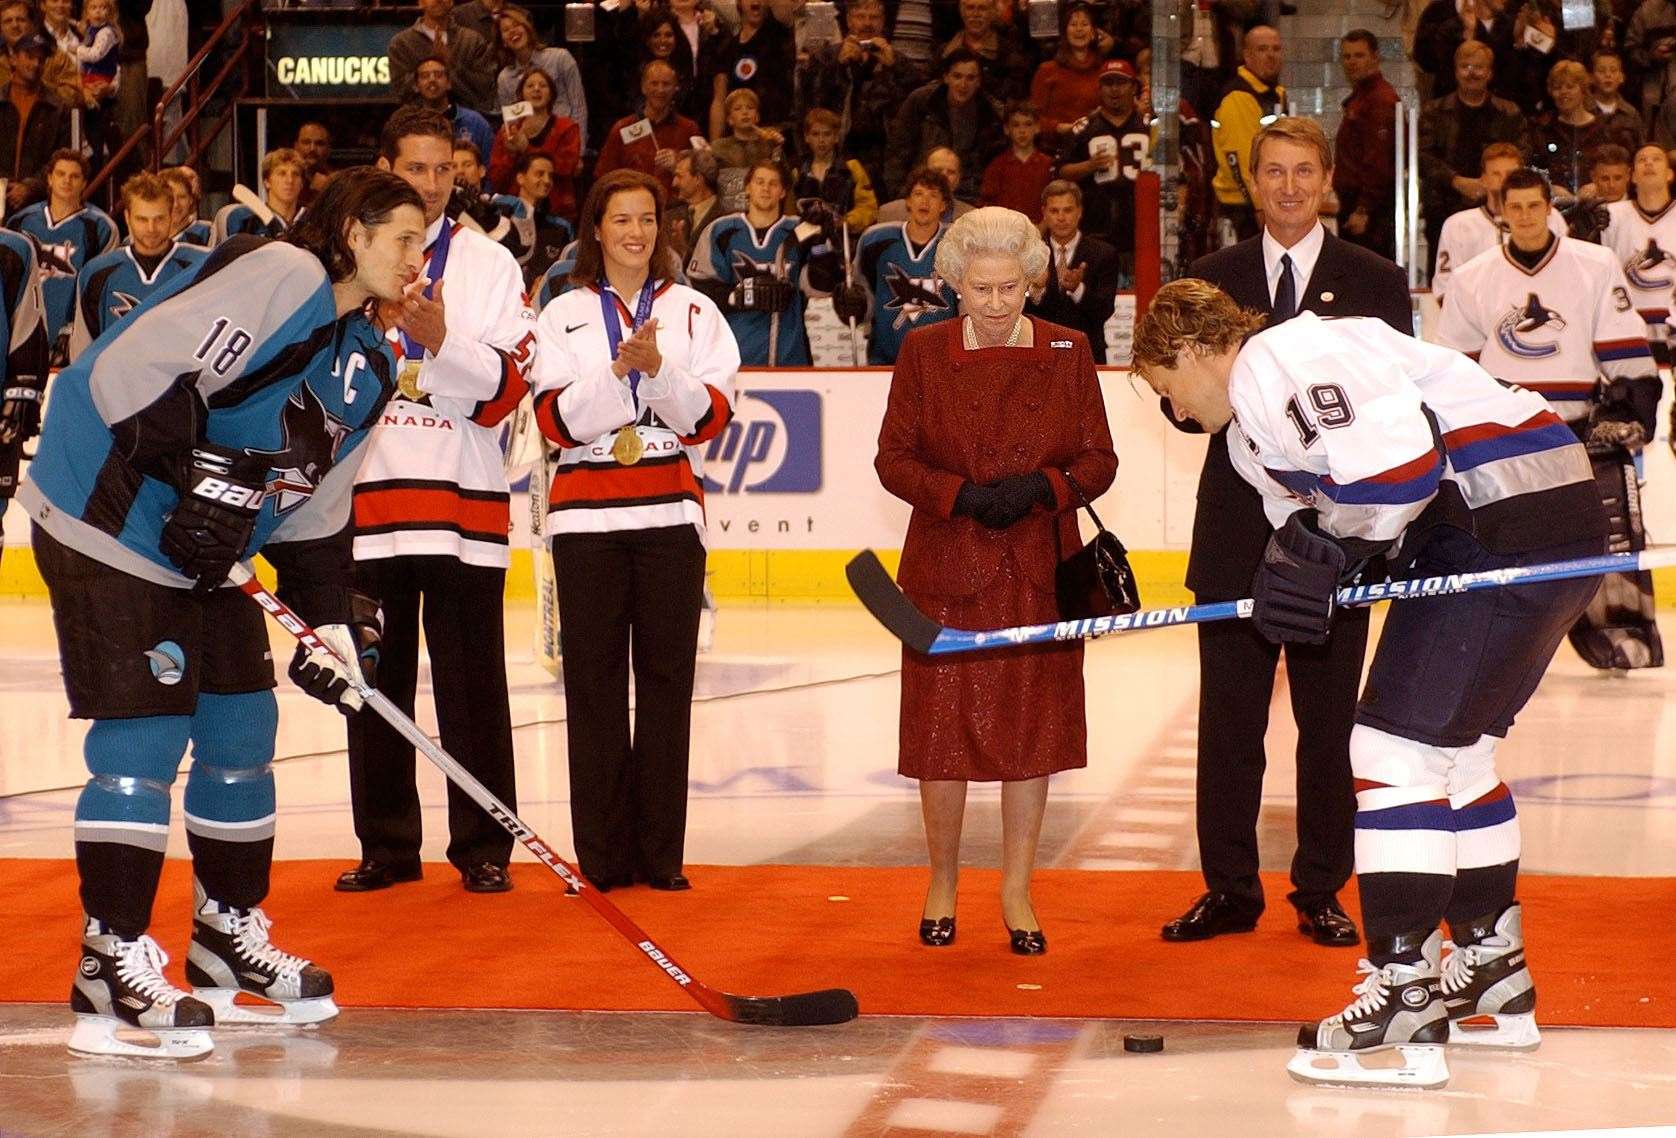 Queen Elizabeth II starts an ice hockey game between San Jose Sharks and Vancouver Canucks during her two-week Golden Jubilee tour of Canada (Kirsty Wigglesworth/PA)